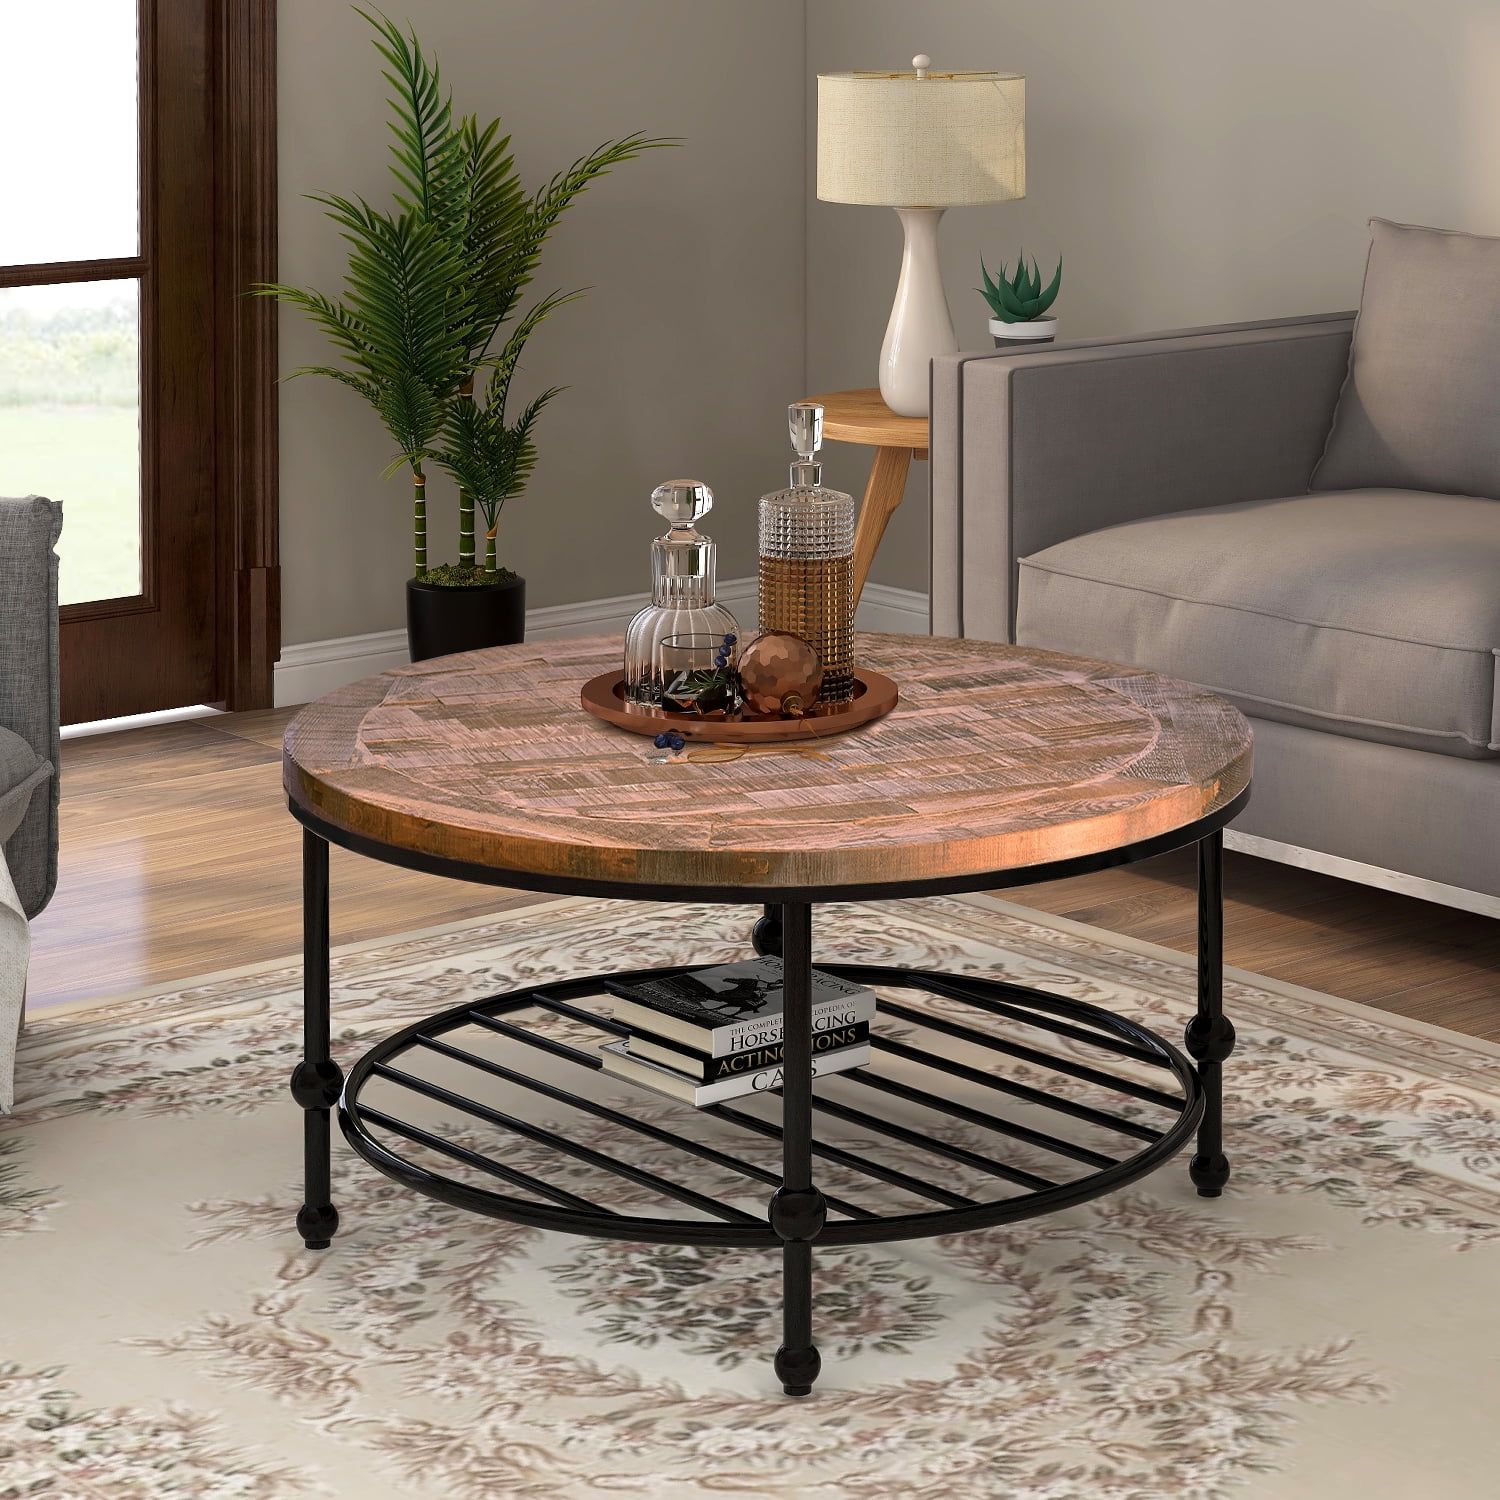 Rustic Natural Round Coffee Table With Storage Shelf For Living Room Inside Round Coffee Tables With Storage (Photo 4 of 15)